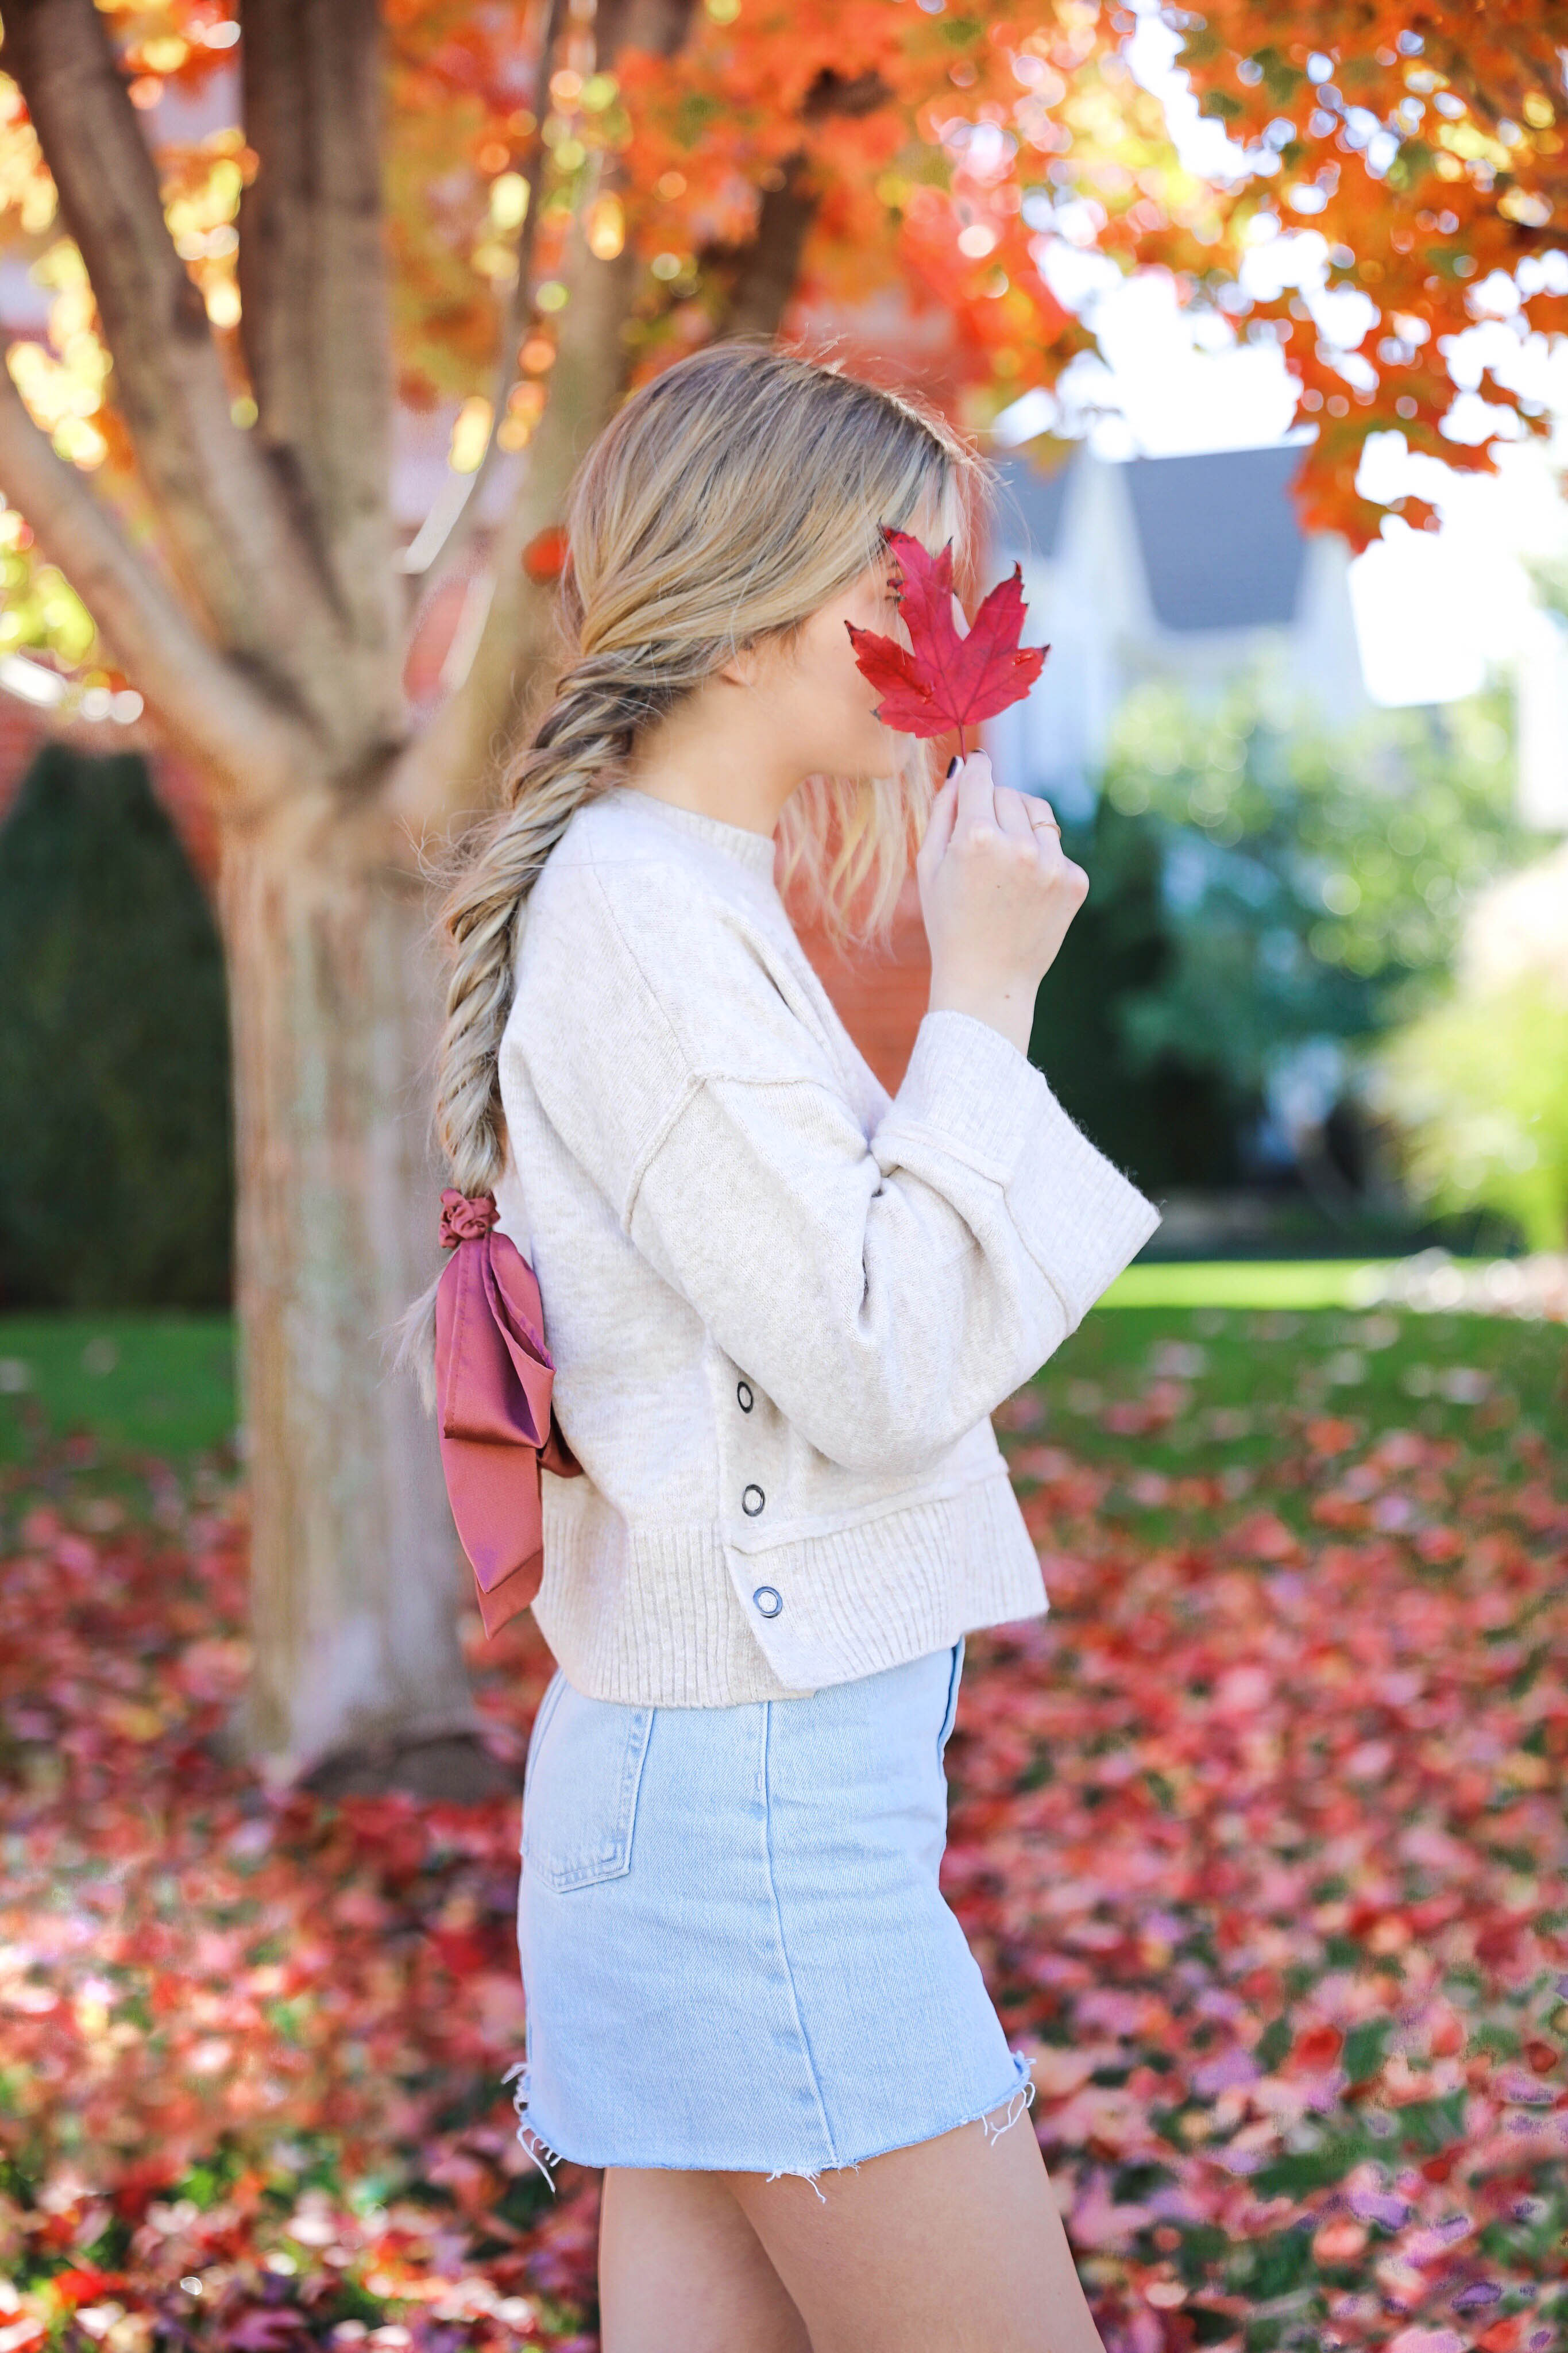 Denim Skirt Outfits You'll Love This Fall & Winter - #AEJeans